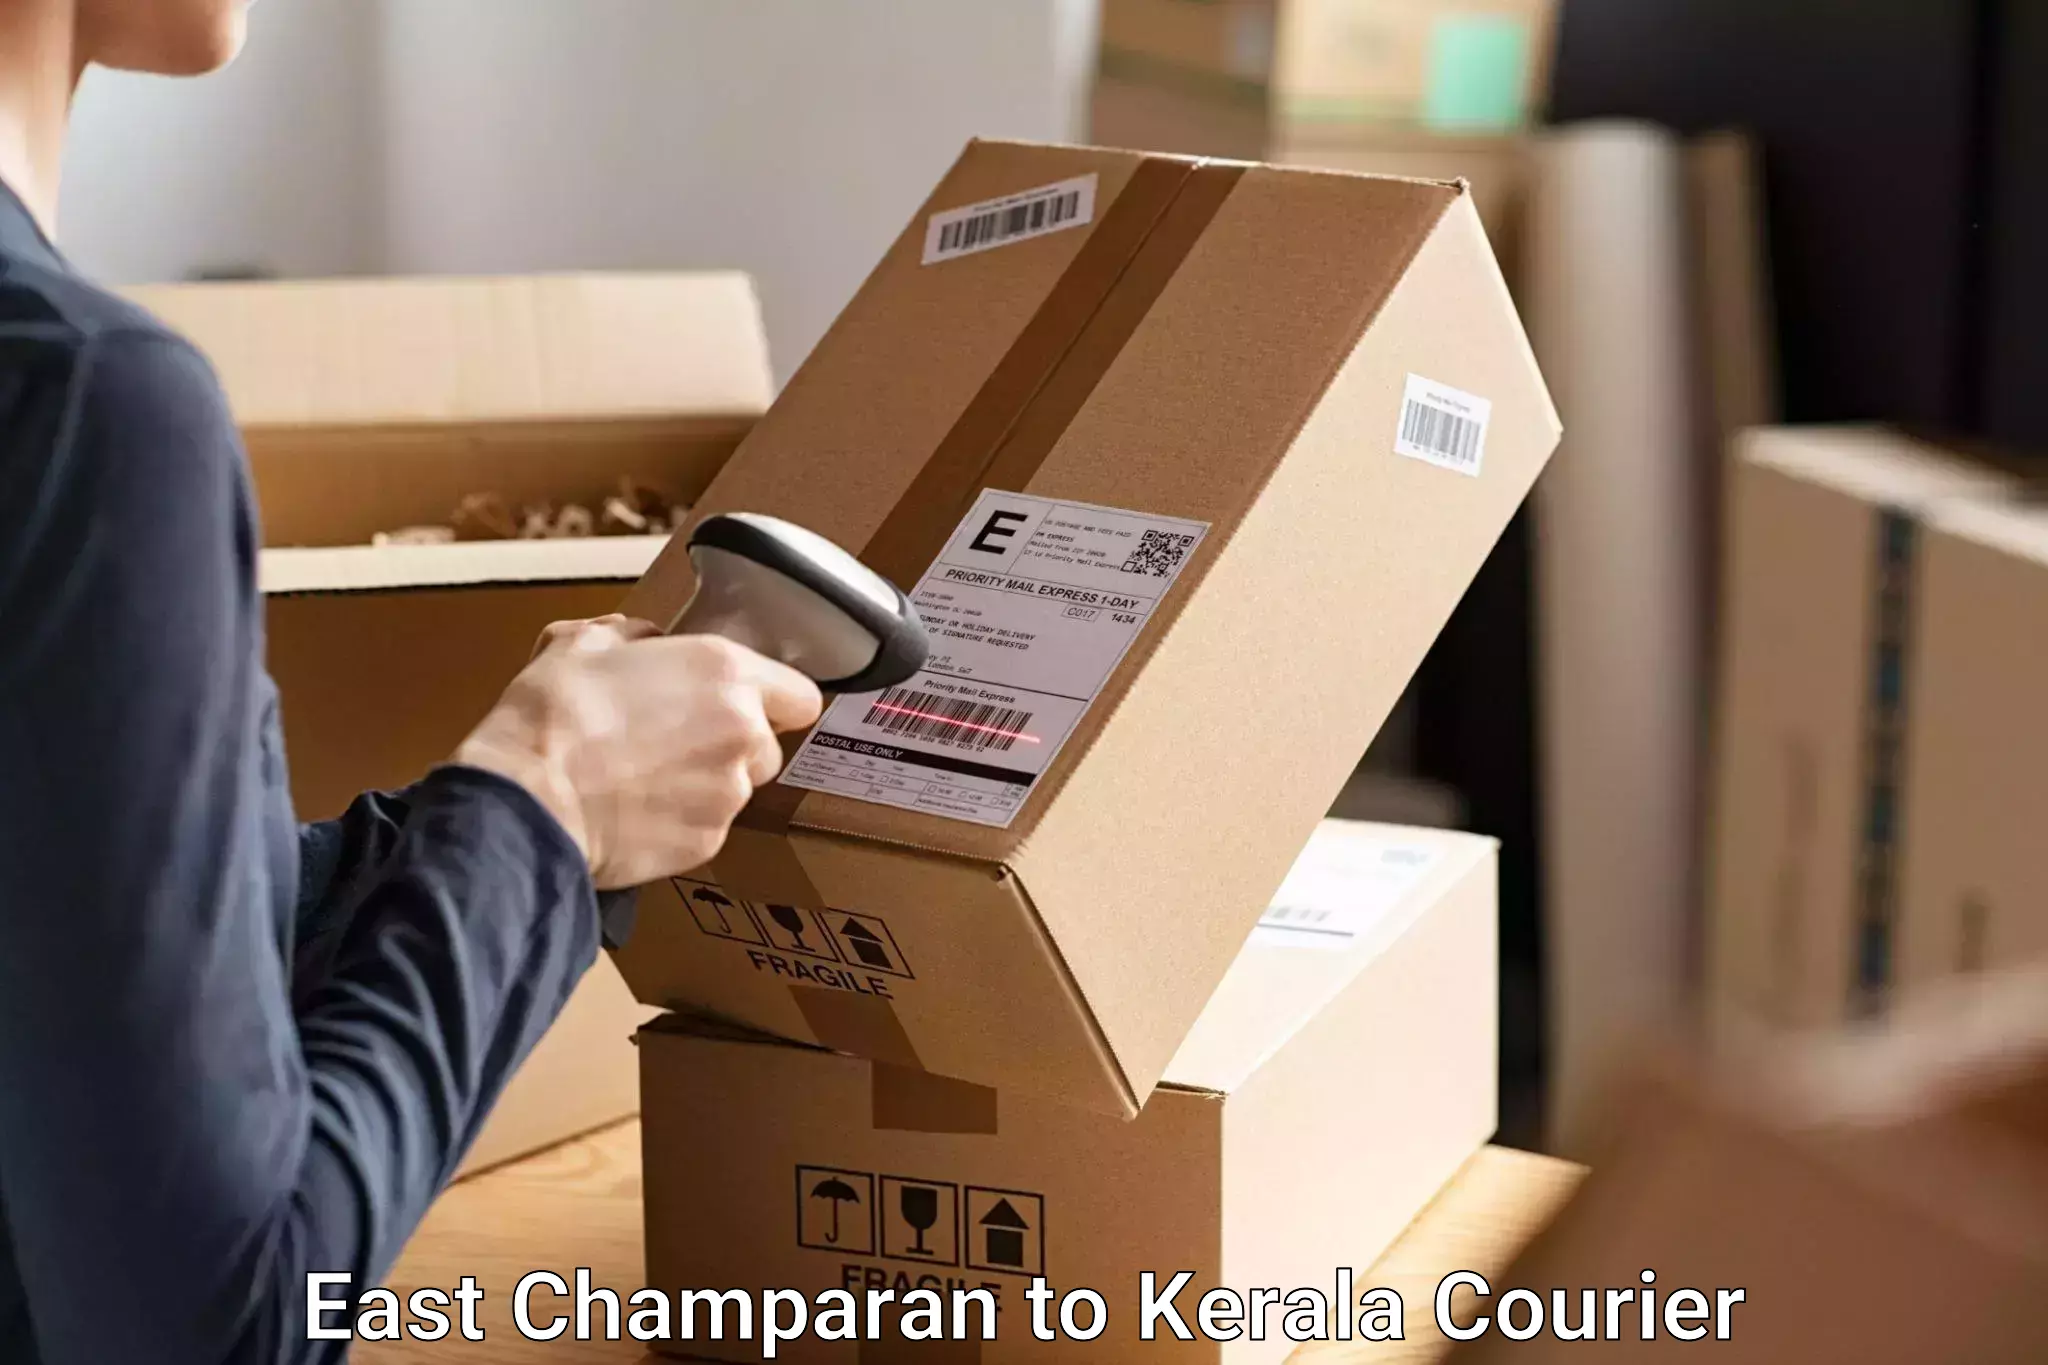 Luggage shipment specialists East Champaran to Kodungallur